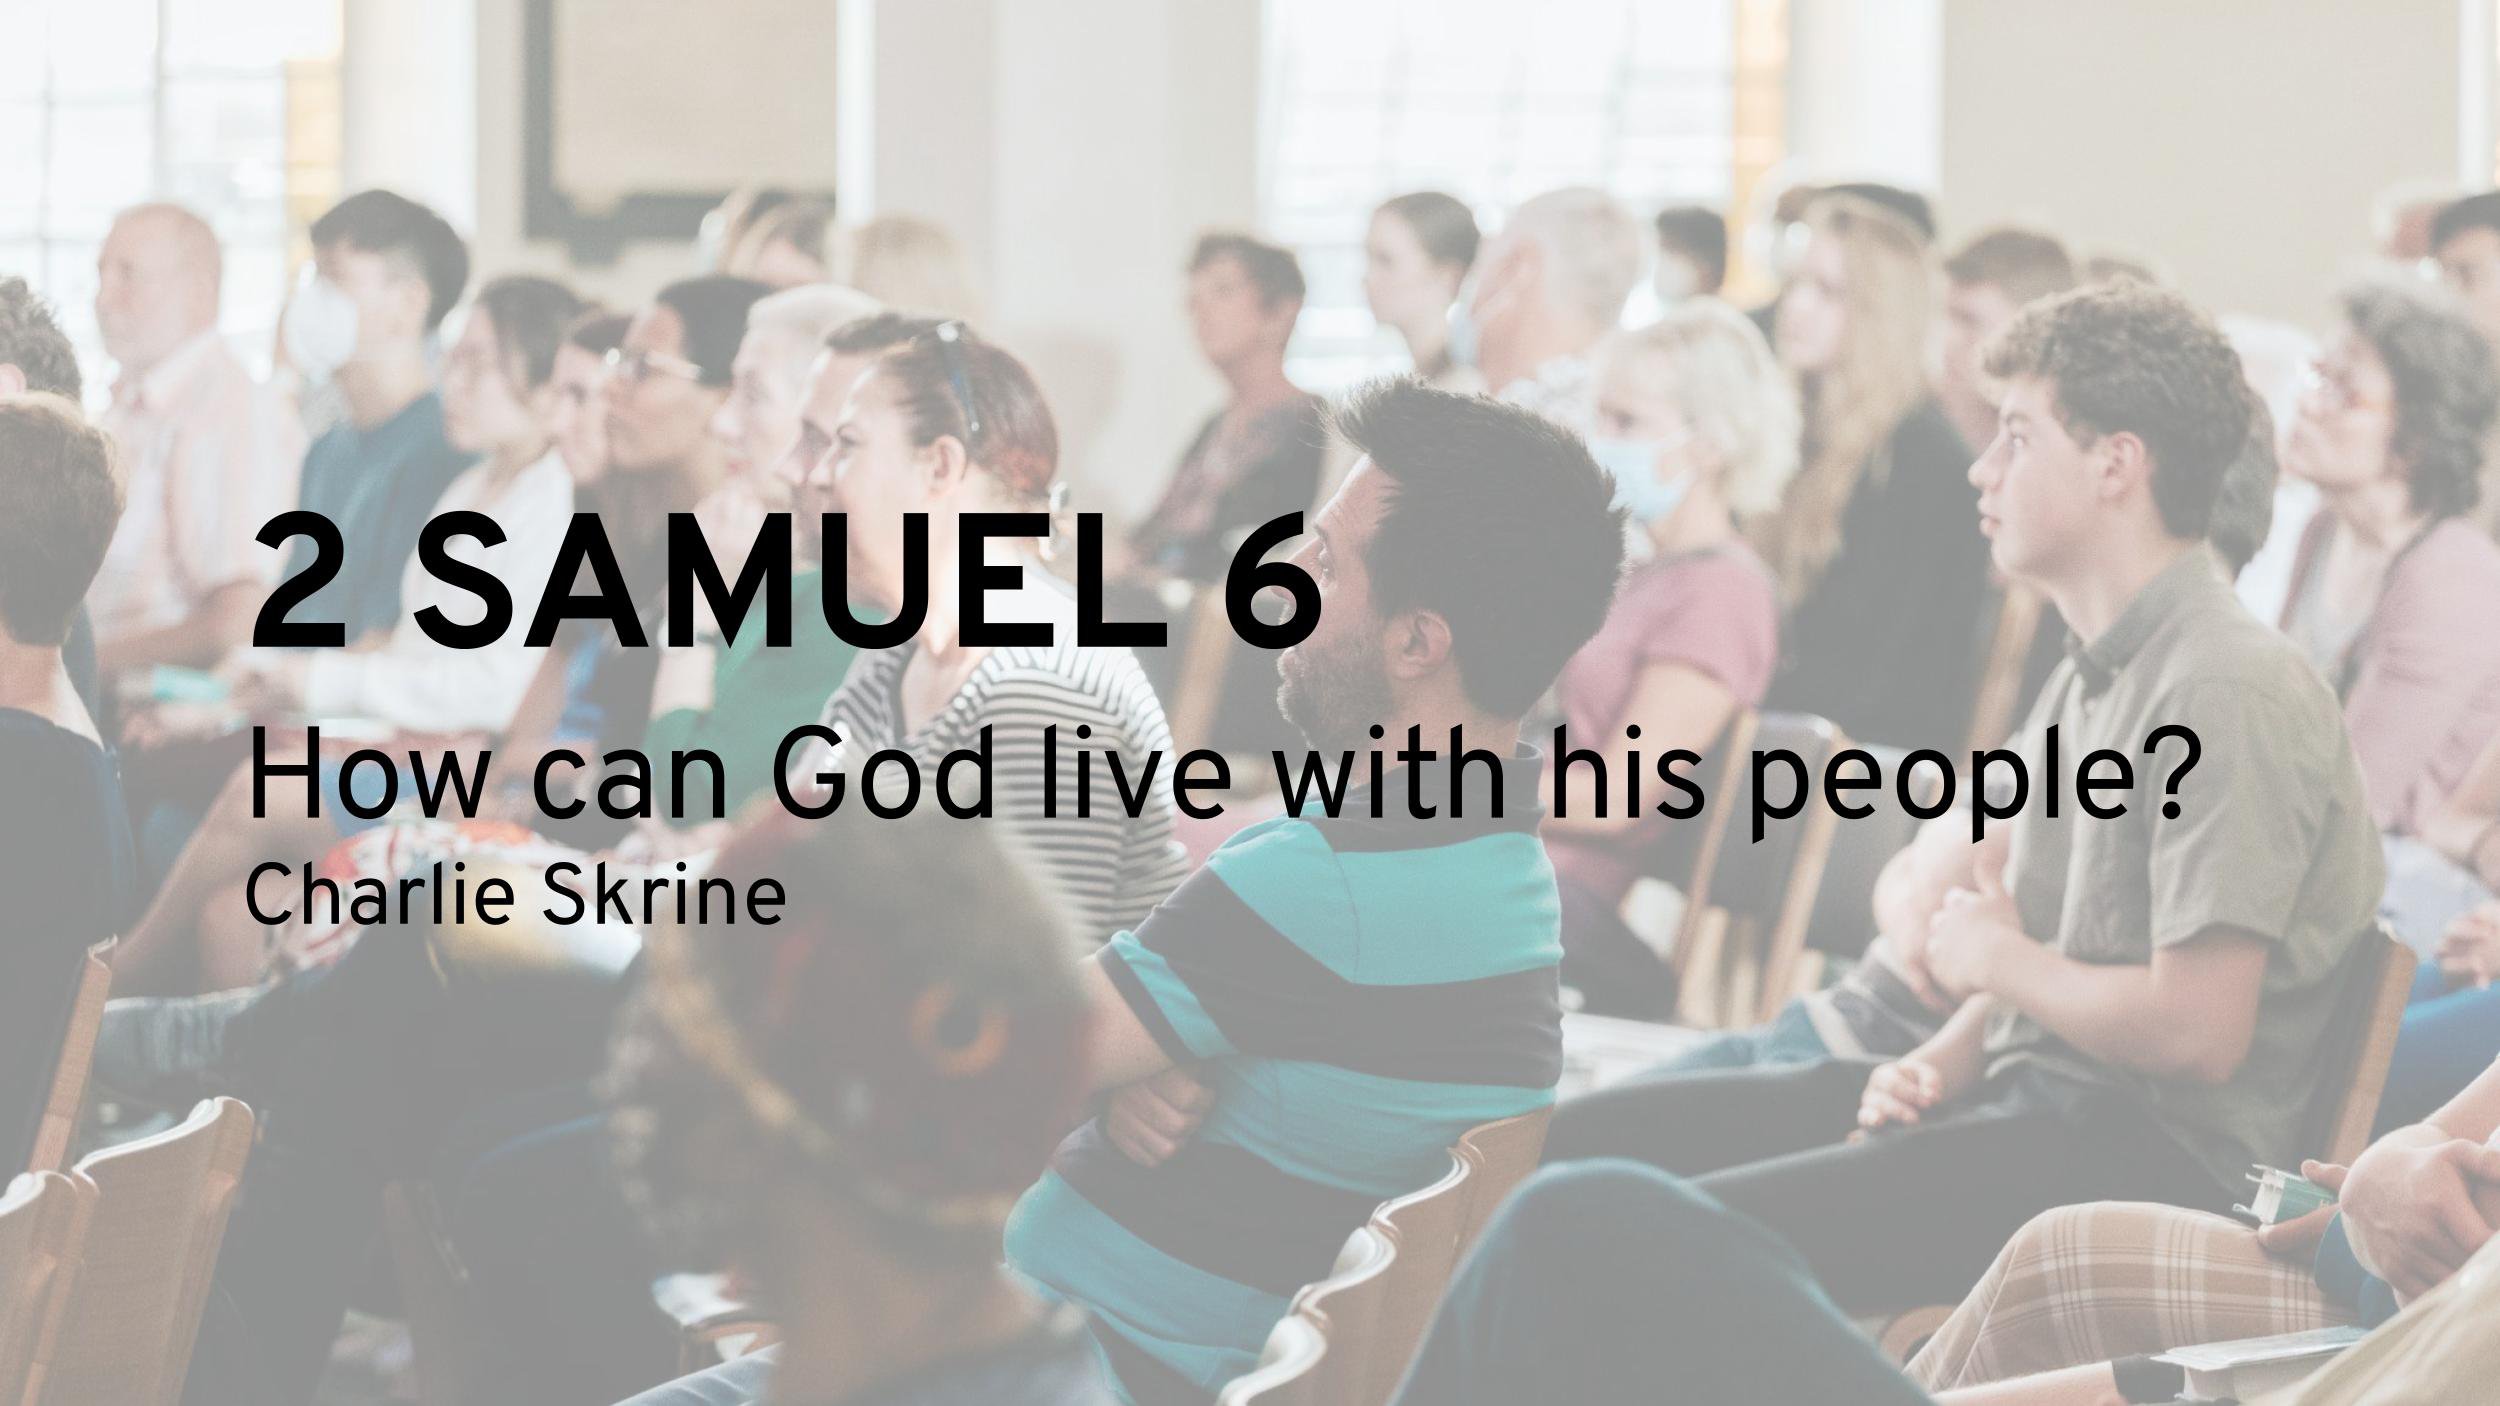 How can God live with his people?